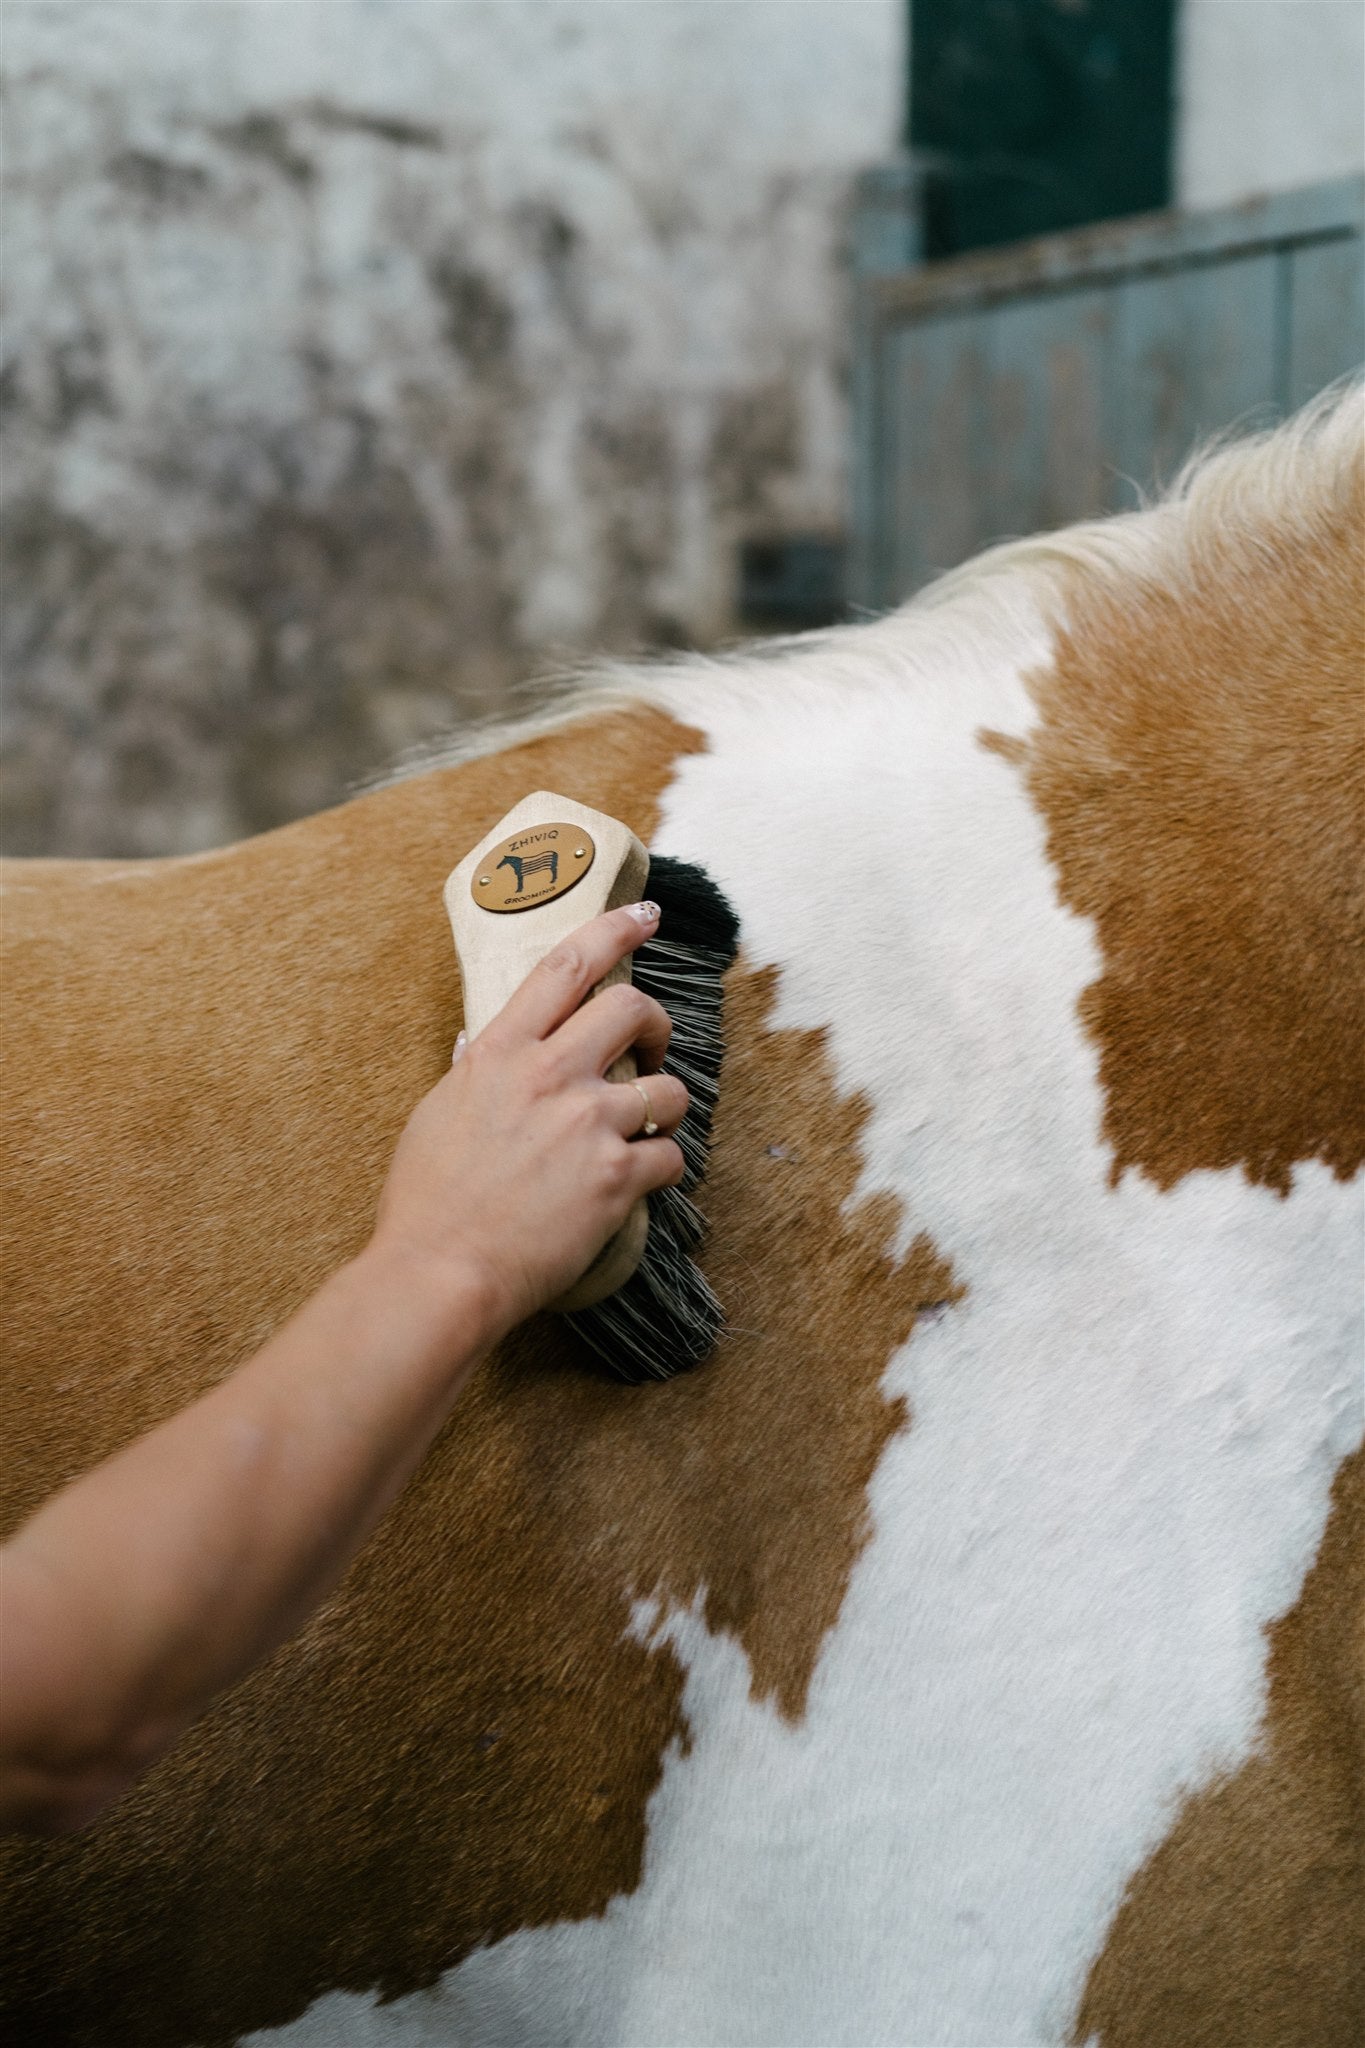 Everything you want to know behind the brand ofZhiviq brush - Banana Soft Flick Zhiviq Banana Soft Flick - Horse Brush - Suitable for removing superficial dirt